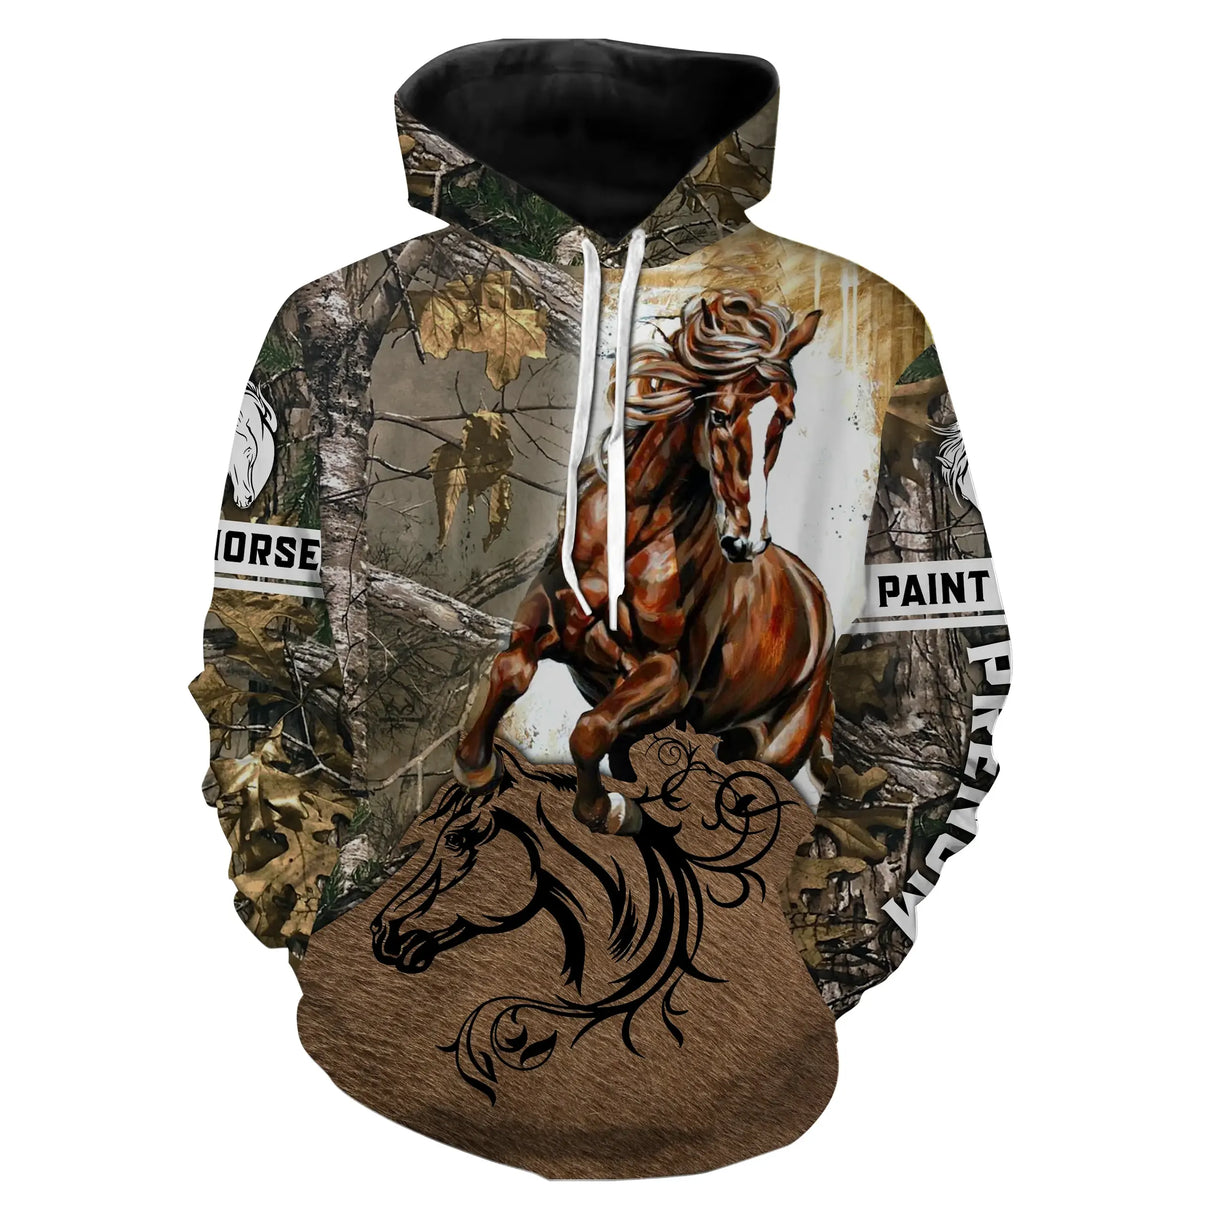 Paint Horse, Saddle Horse Breed, Personalized Horse Riding Gift, Passion Horses, Paint Horse of Love - CT06072222